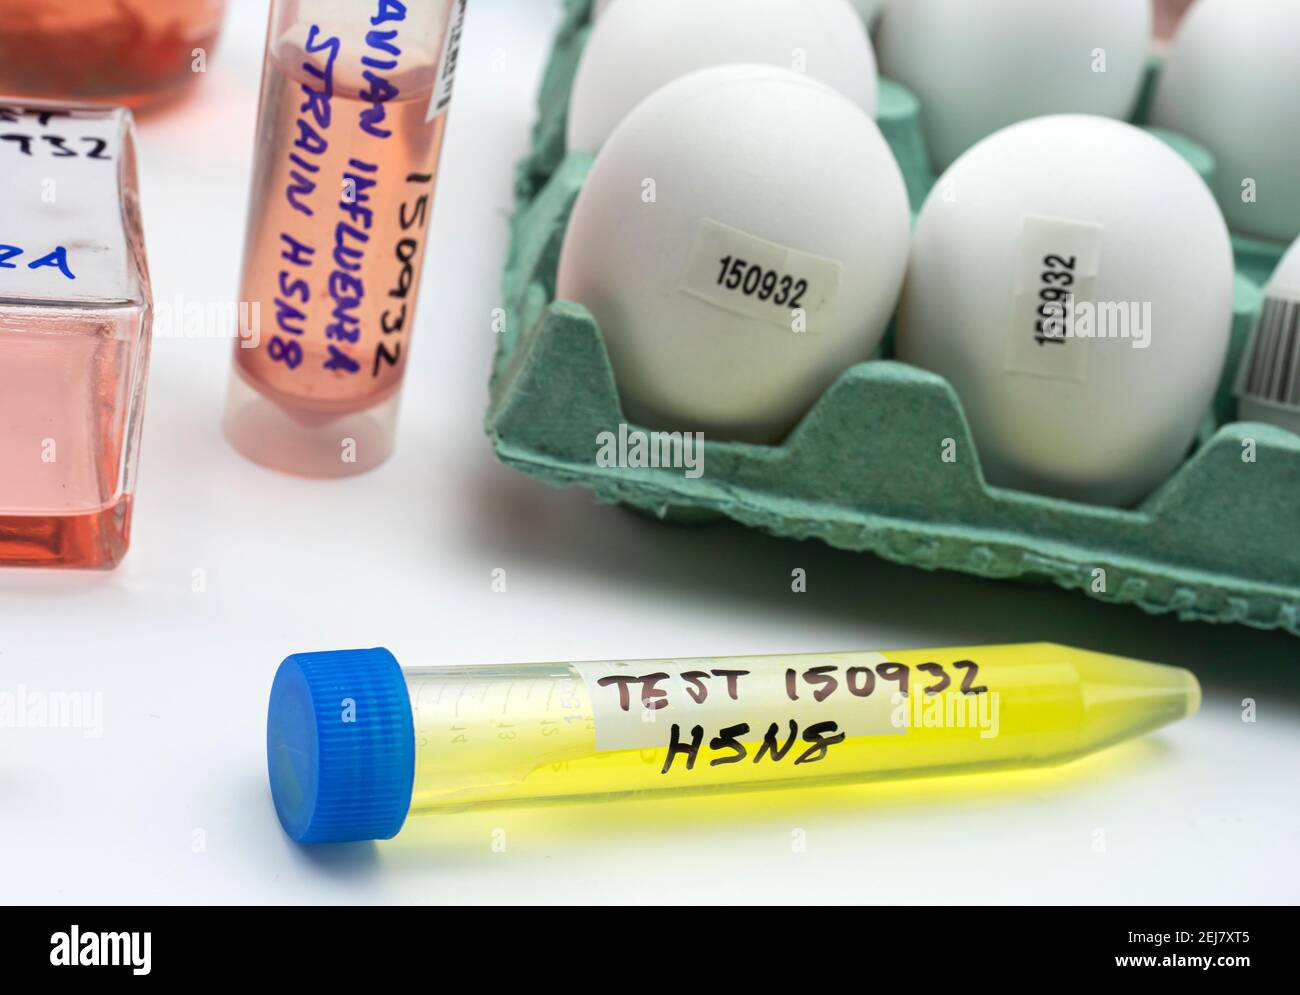 new strain of H5N8 avian influenza infected in humans, vial with samples, conceptual image Stock Photo